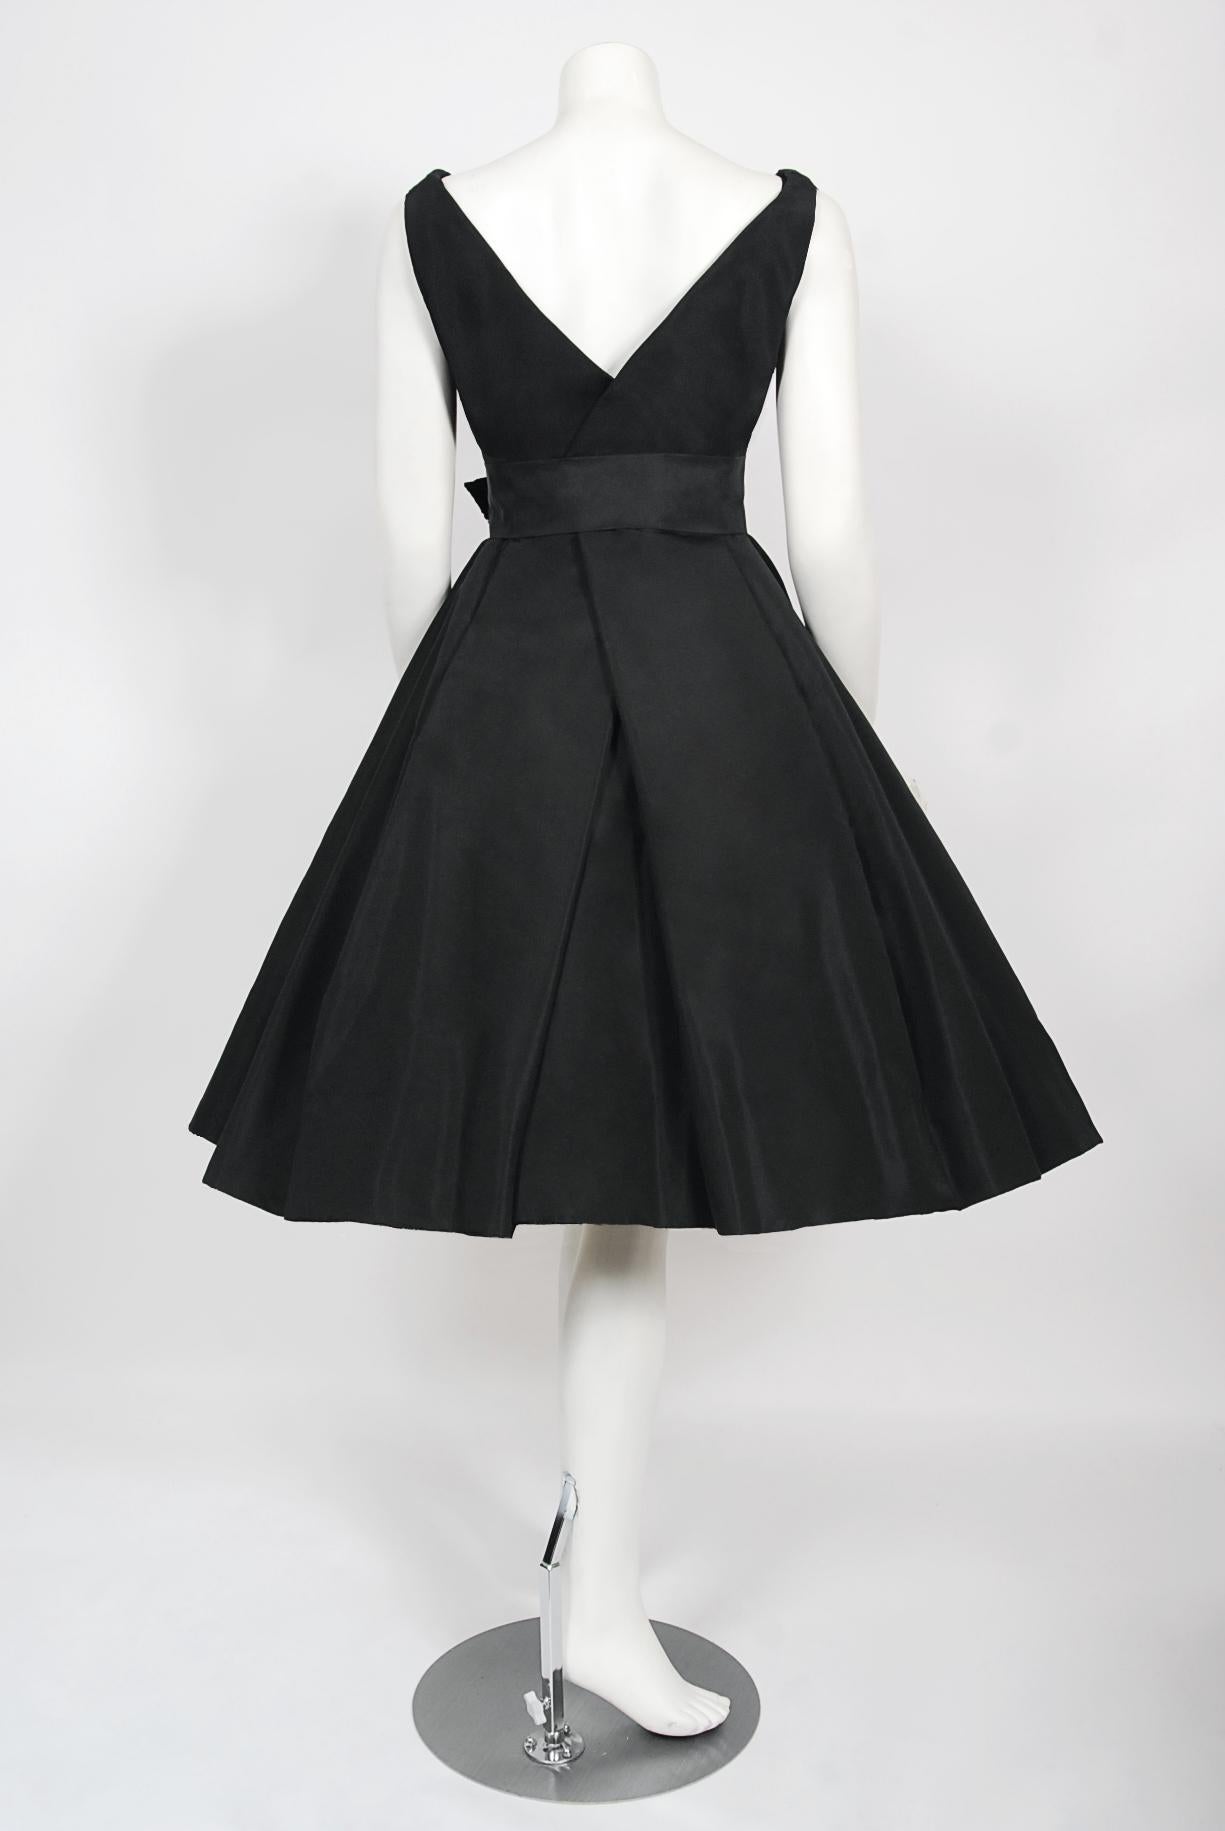 Vintage 1956 Christian Dior Haute Couture Documented Black Silk 'New Look' Dress 9